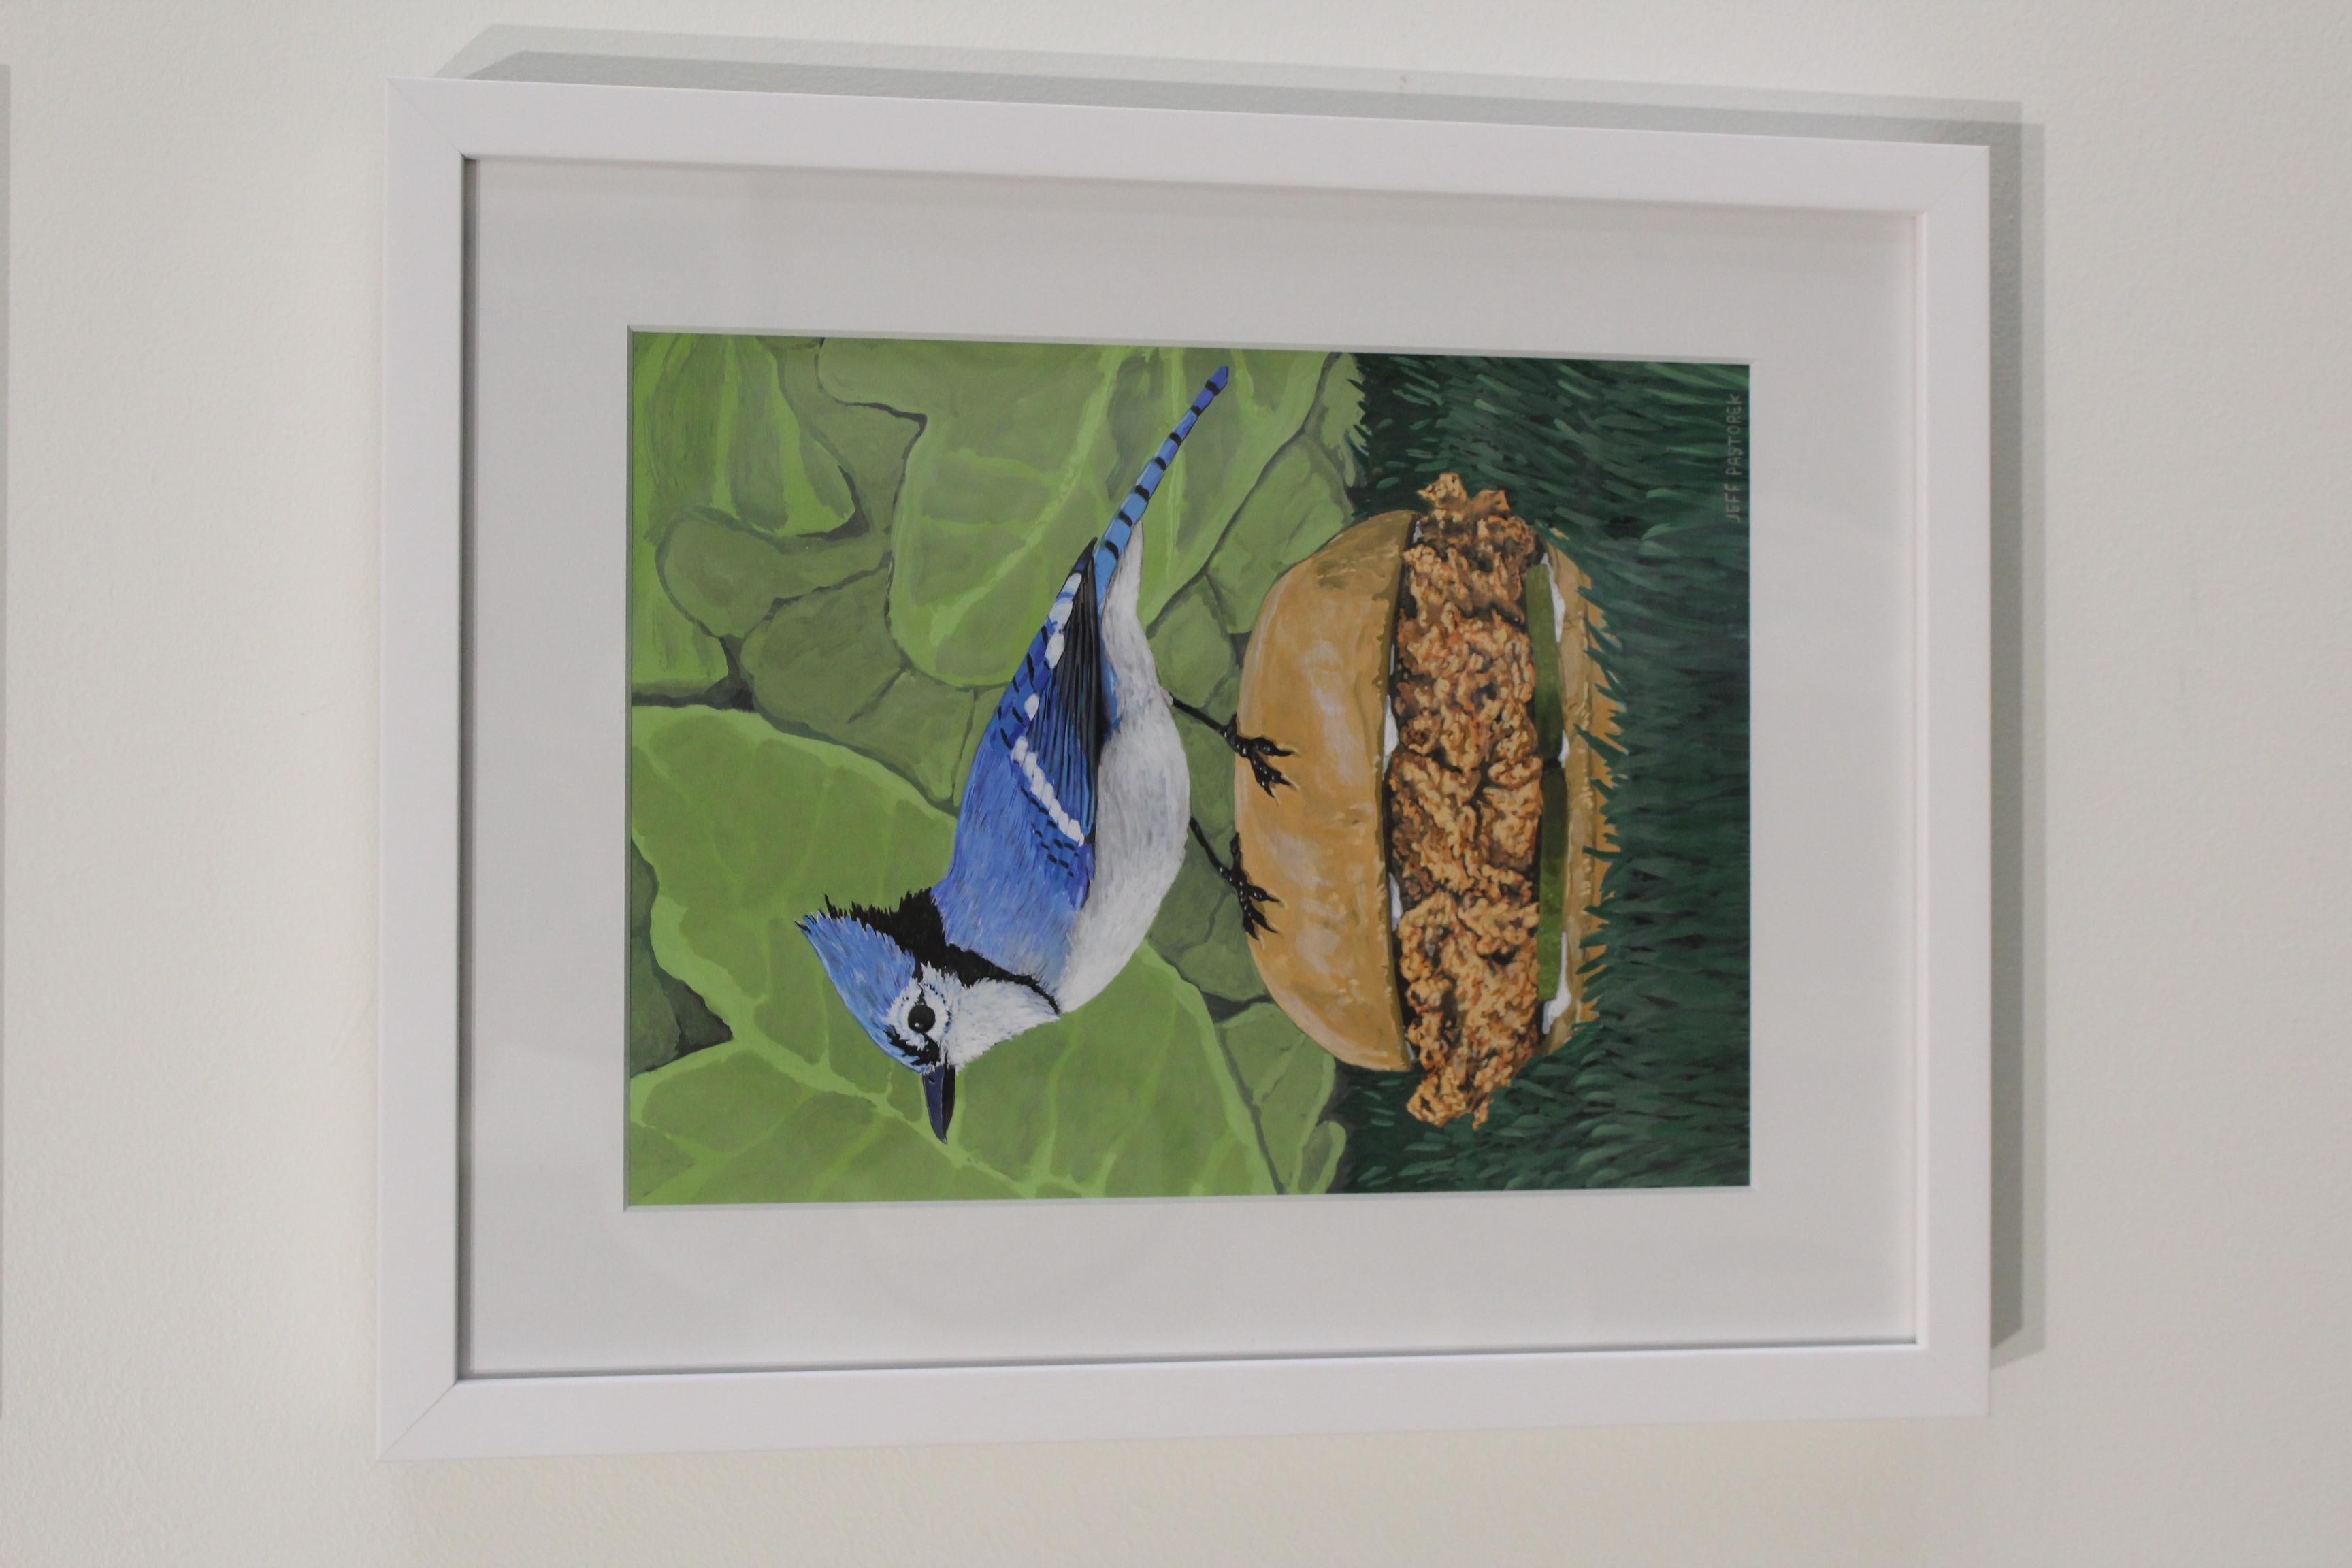 From New Orleans artist Jeff Pastorek's birds on fast food series, this painting displays a blue jay on a Popeye's chicken sandwich.